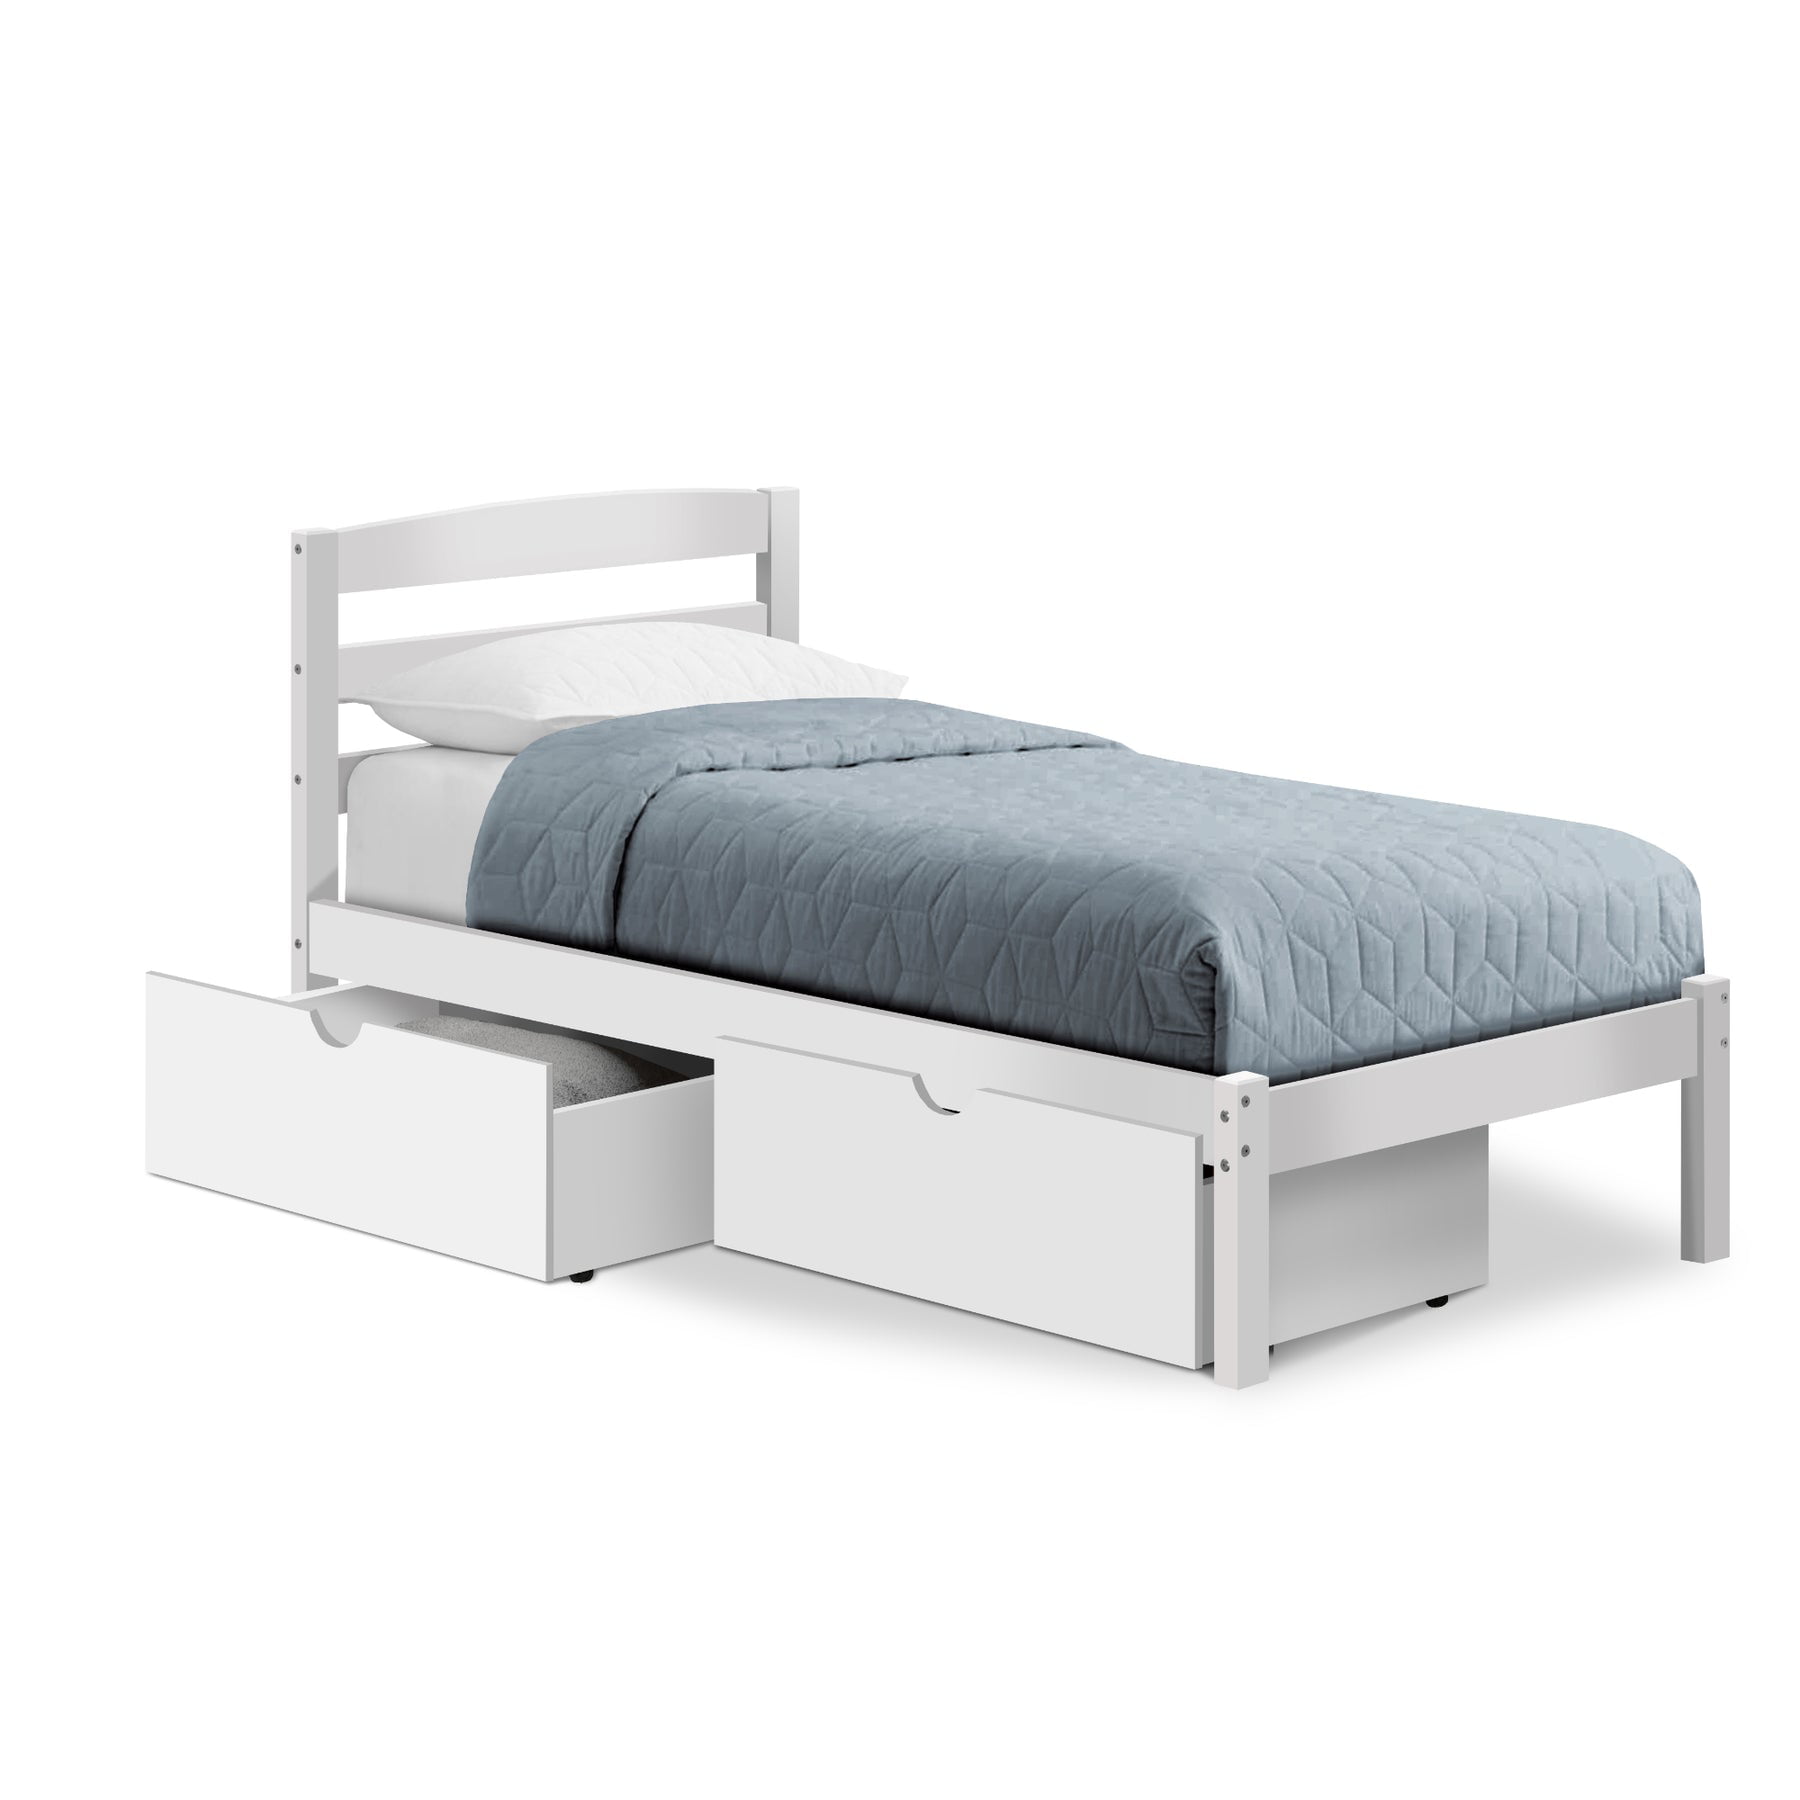 Twin Bed with Storage Drawers, White - Walmart.com